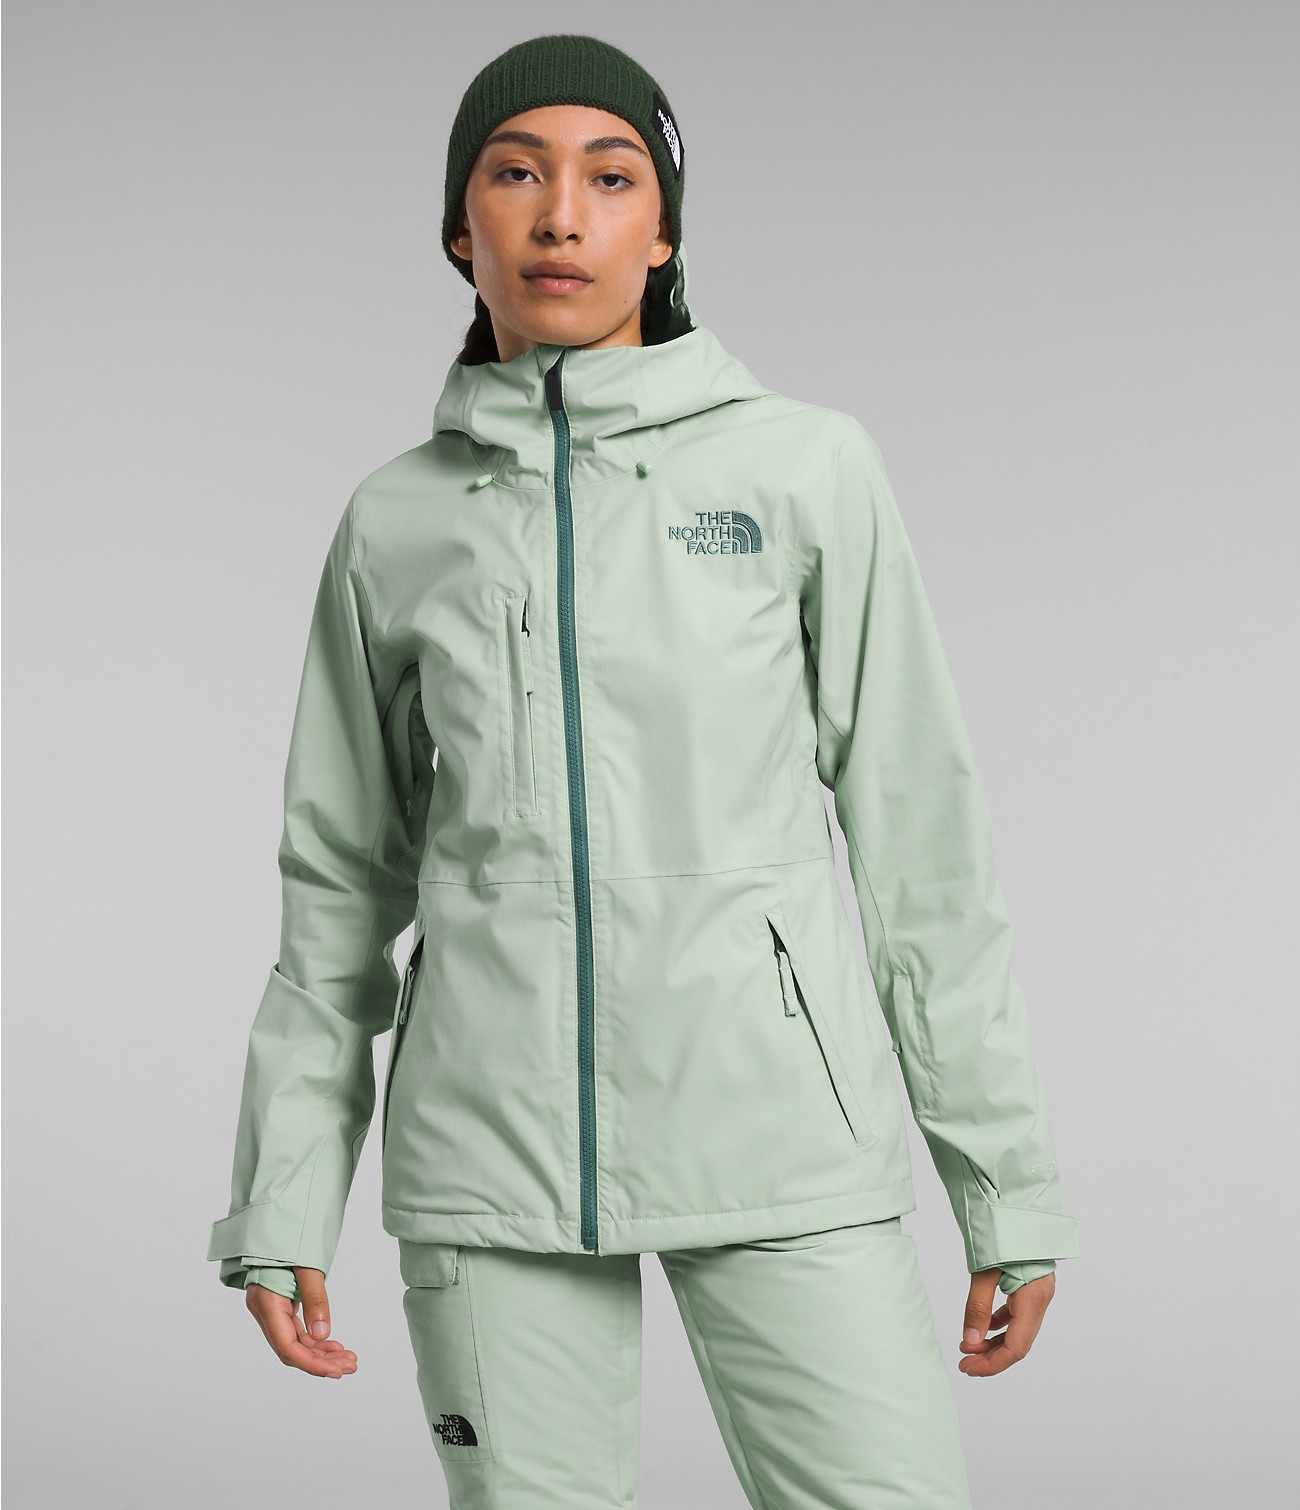 Unlock Wilderness' choice in the Obermeyer Vs North Face comparison, the Freedom Stretch Jacket by The North Face